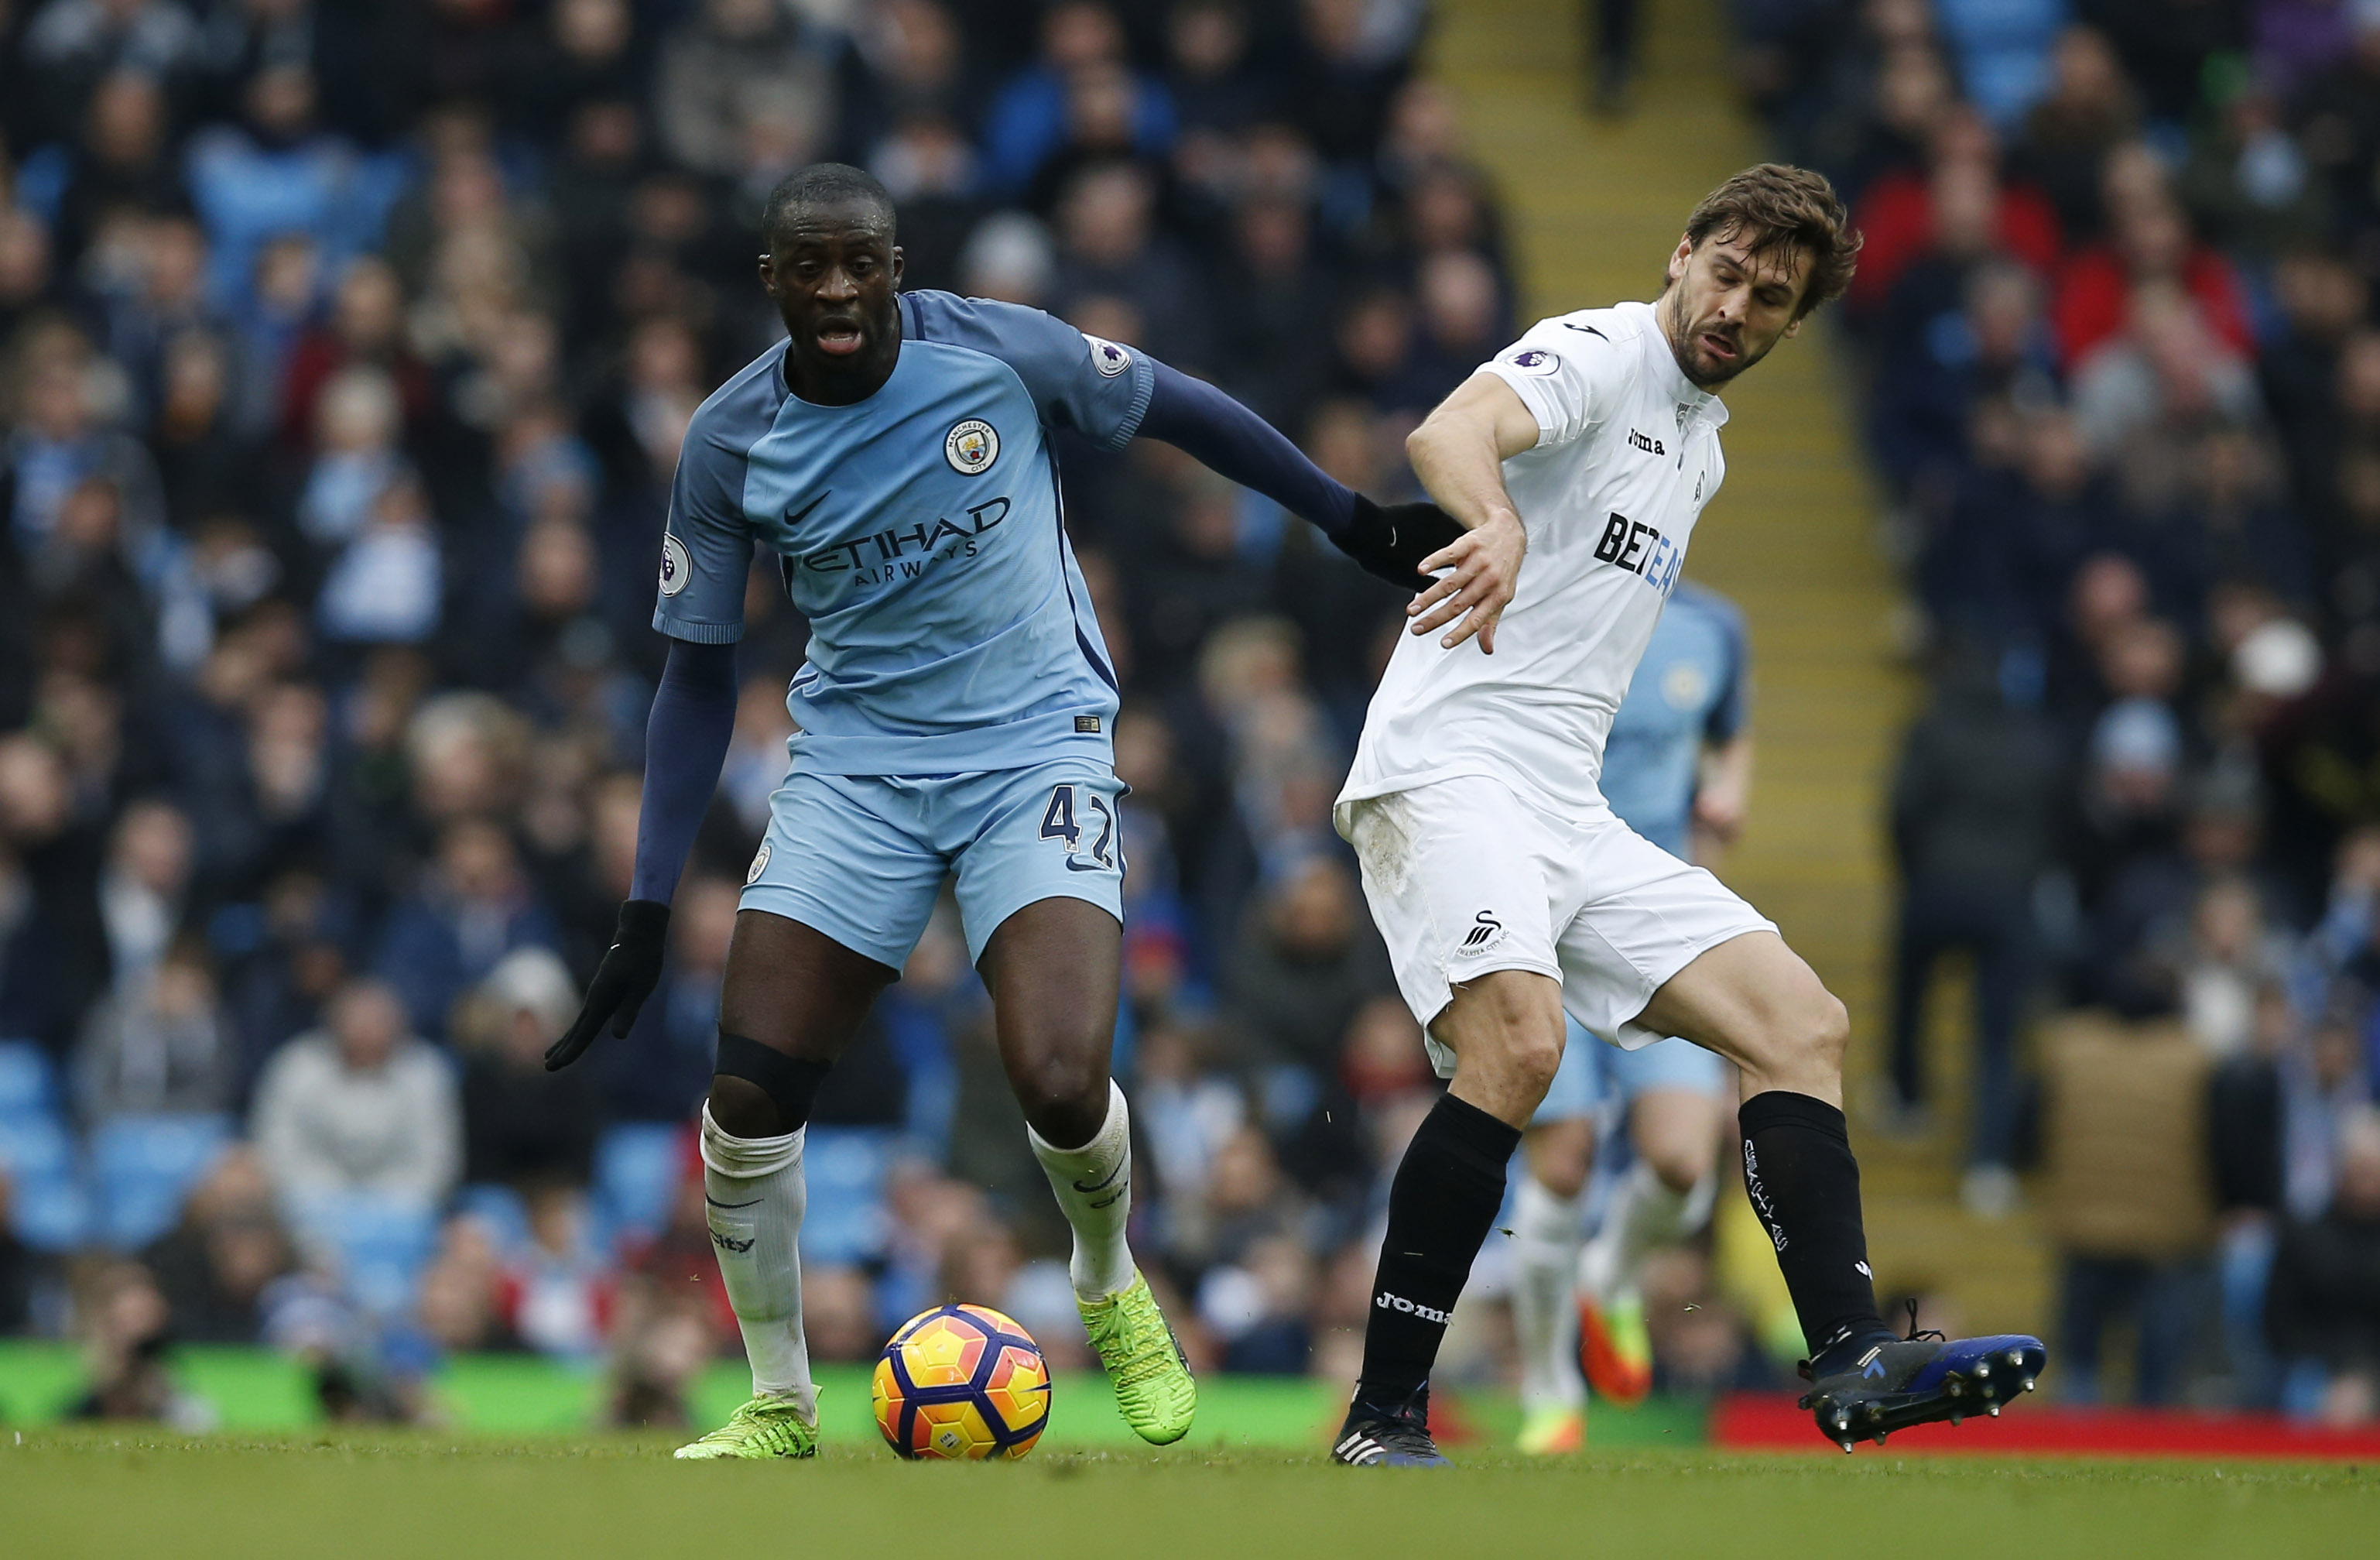 Football: Toure warns against weighing down Jesus with expectations